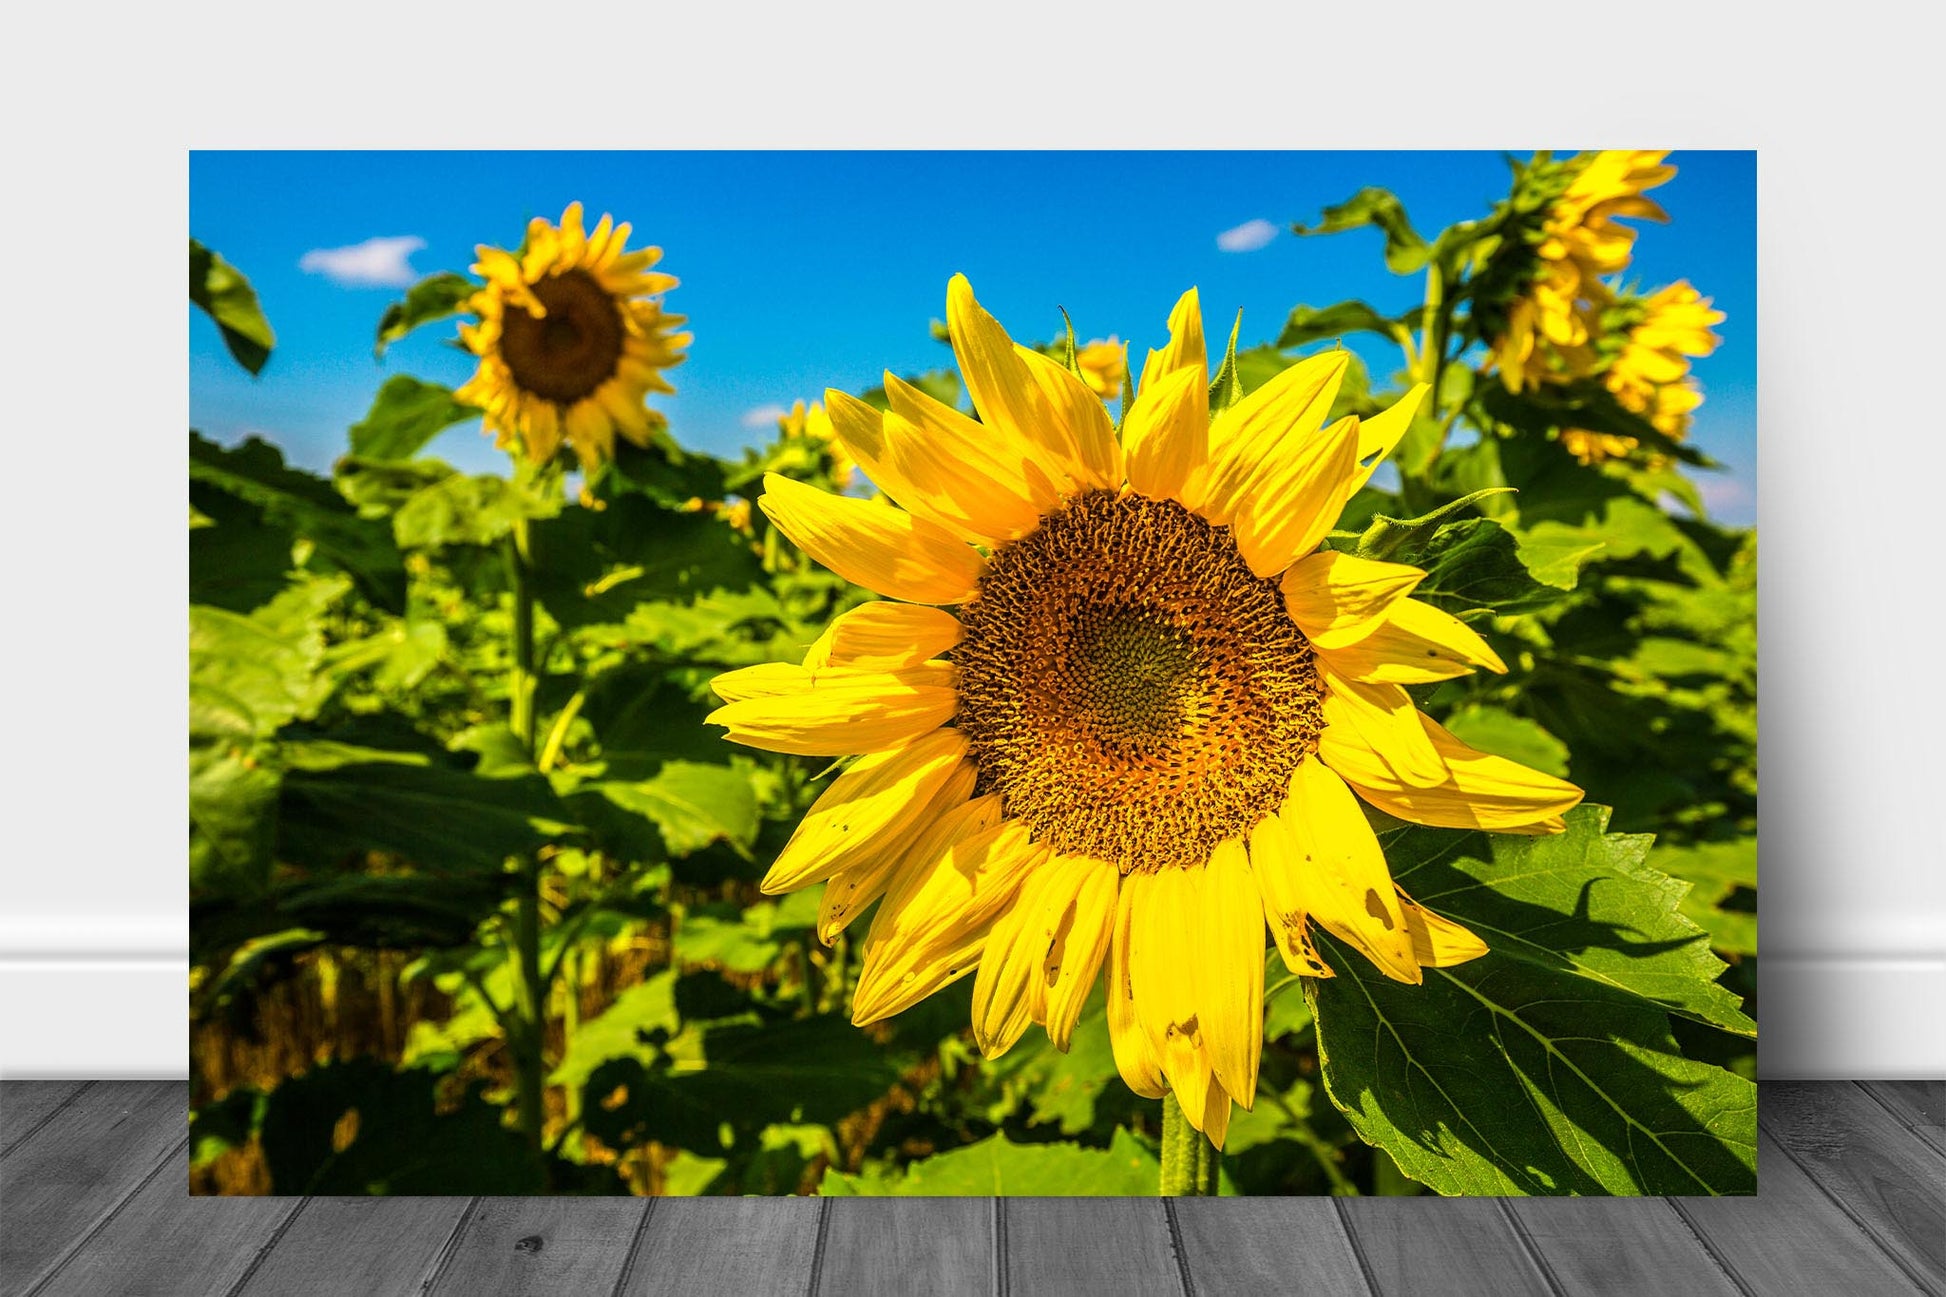 Botanical metal print om aluminum of a large yellow sunflower in a sunflower field on a late summer day in Kansas by Sean Ramsey of Southern Plains Photography.